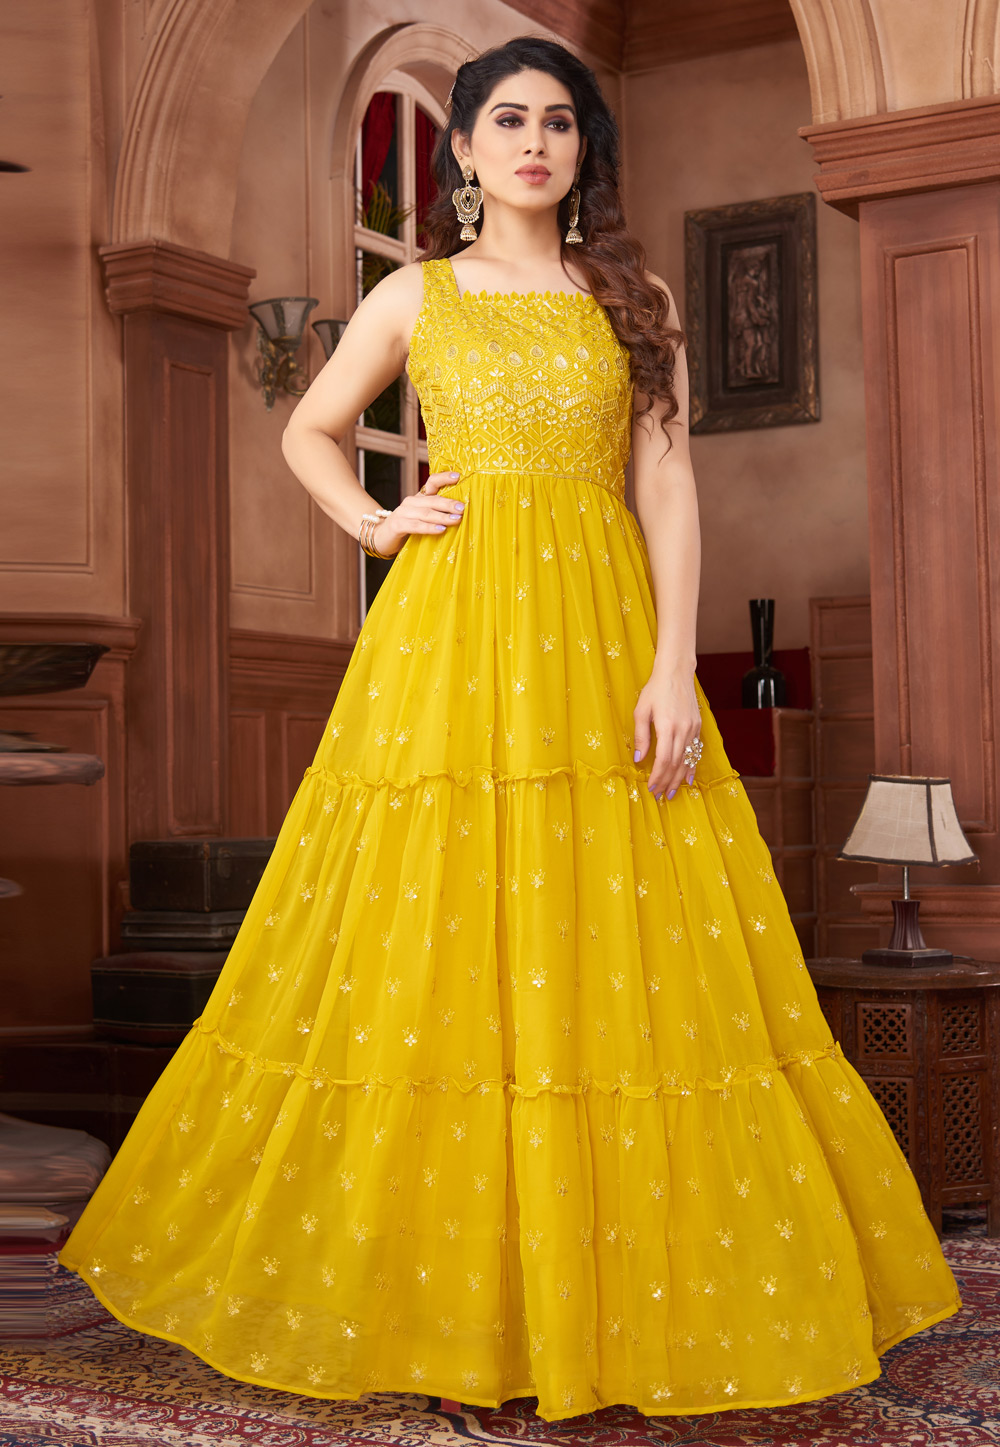 Long Gown Dress In Yellow Color With Jacard border - Spegrow Mart